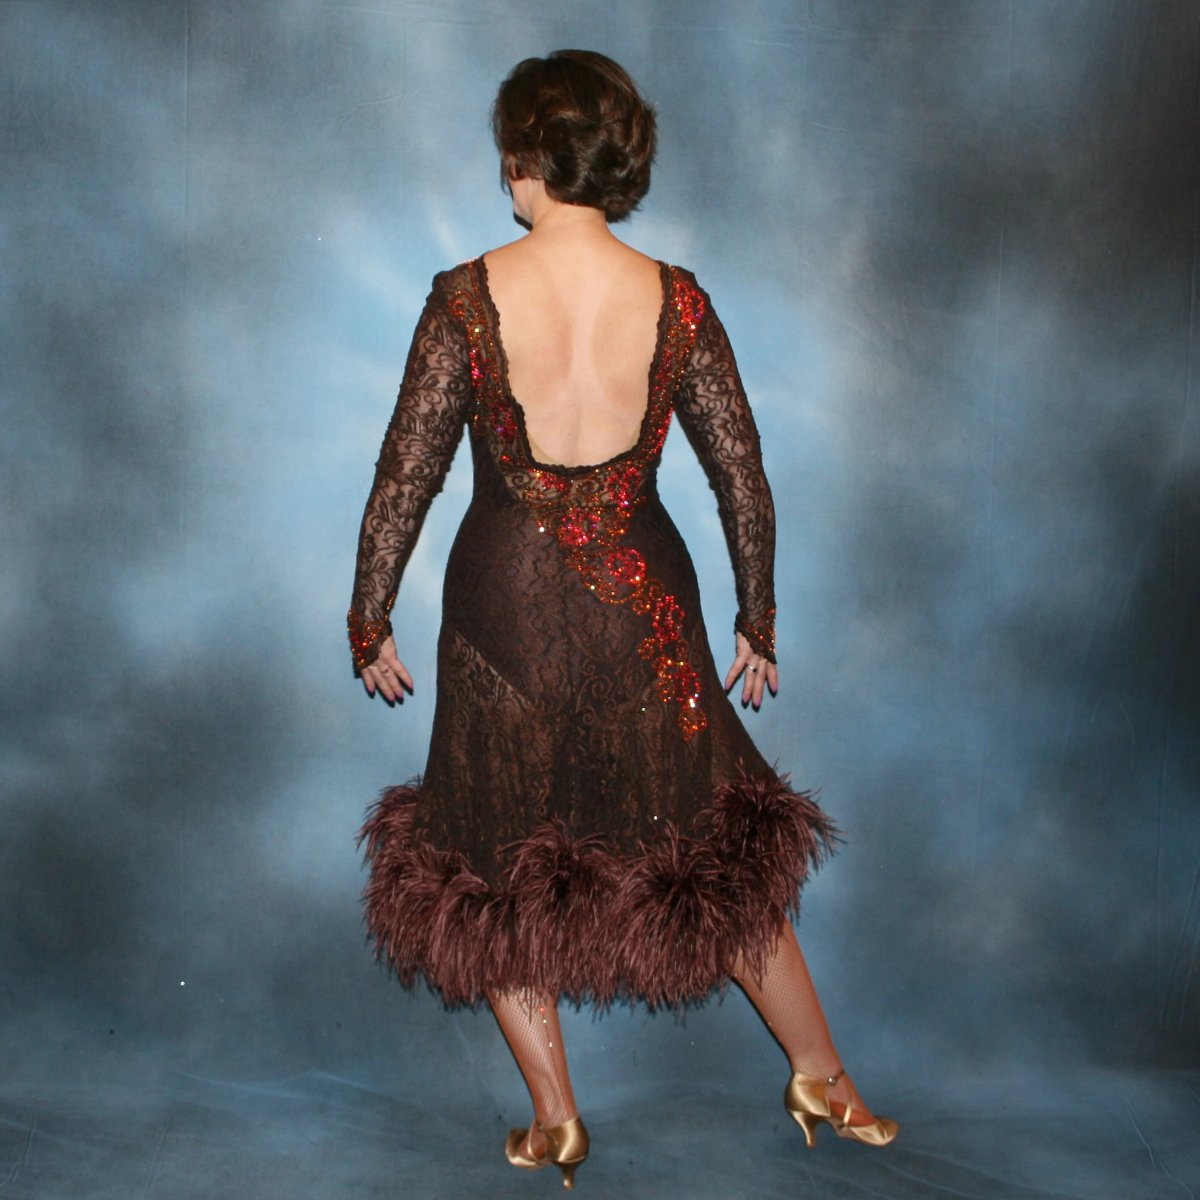 Crystal's Creations back view of Chocolate brown Latin/rhythm dance dress of stretch lace lavished with detailed Swarovski stonework done in Indian pink* & crystal copper… with ostrich feathers adorning the skirt edge…and includes under bodysuit.